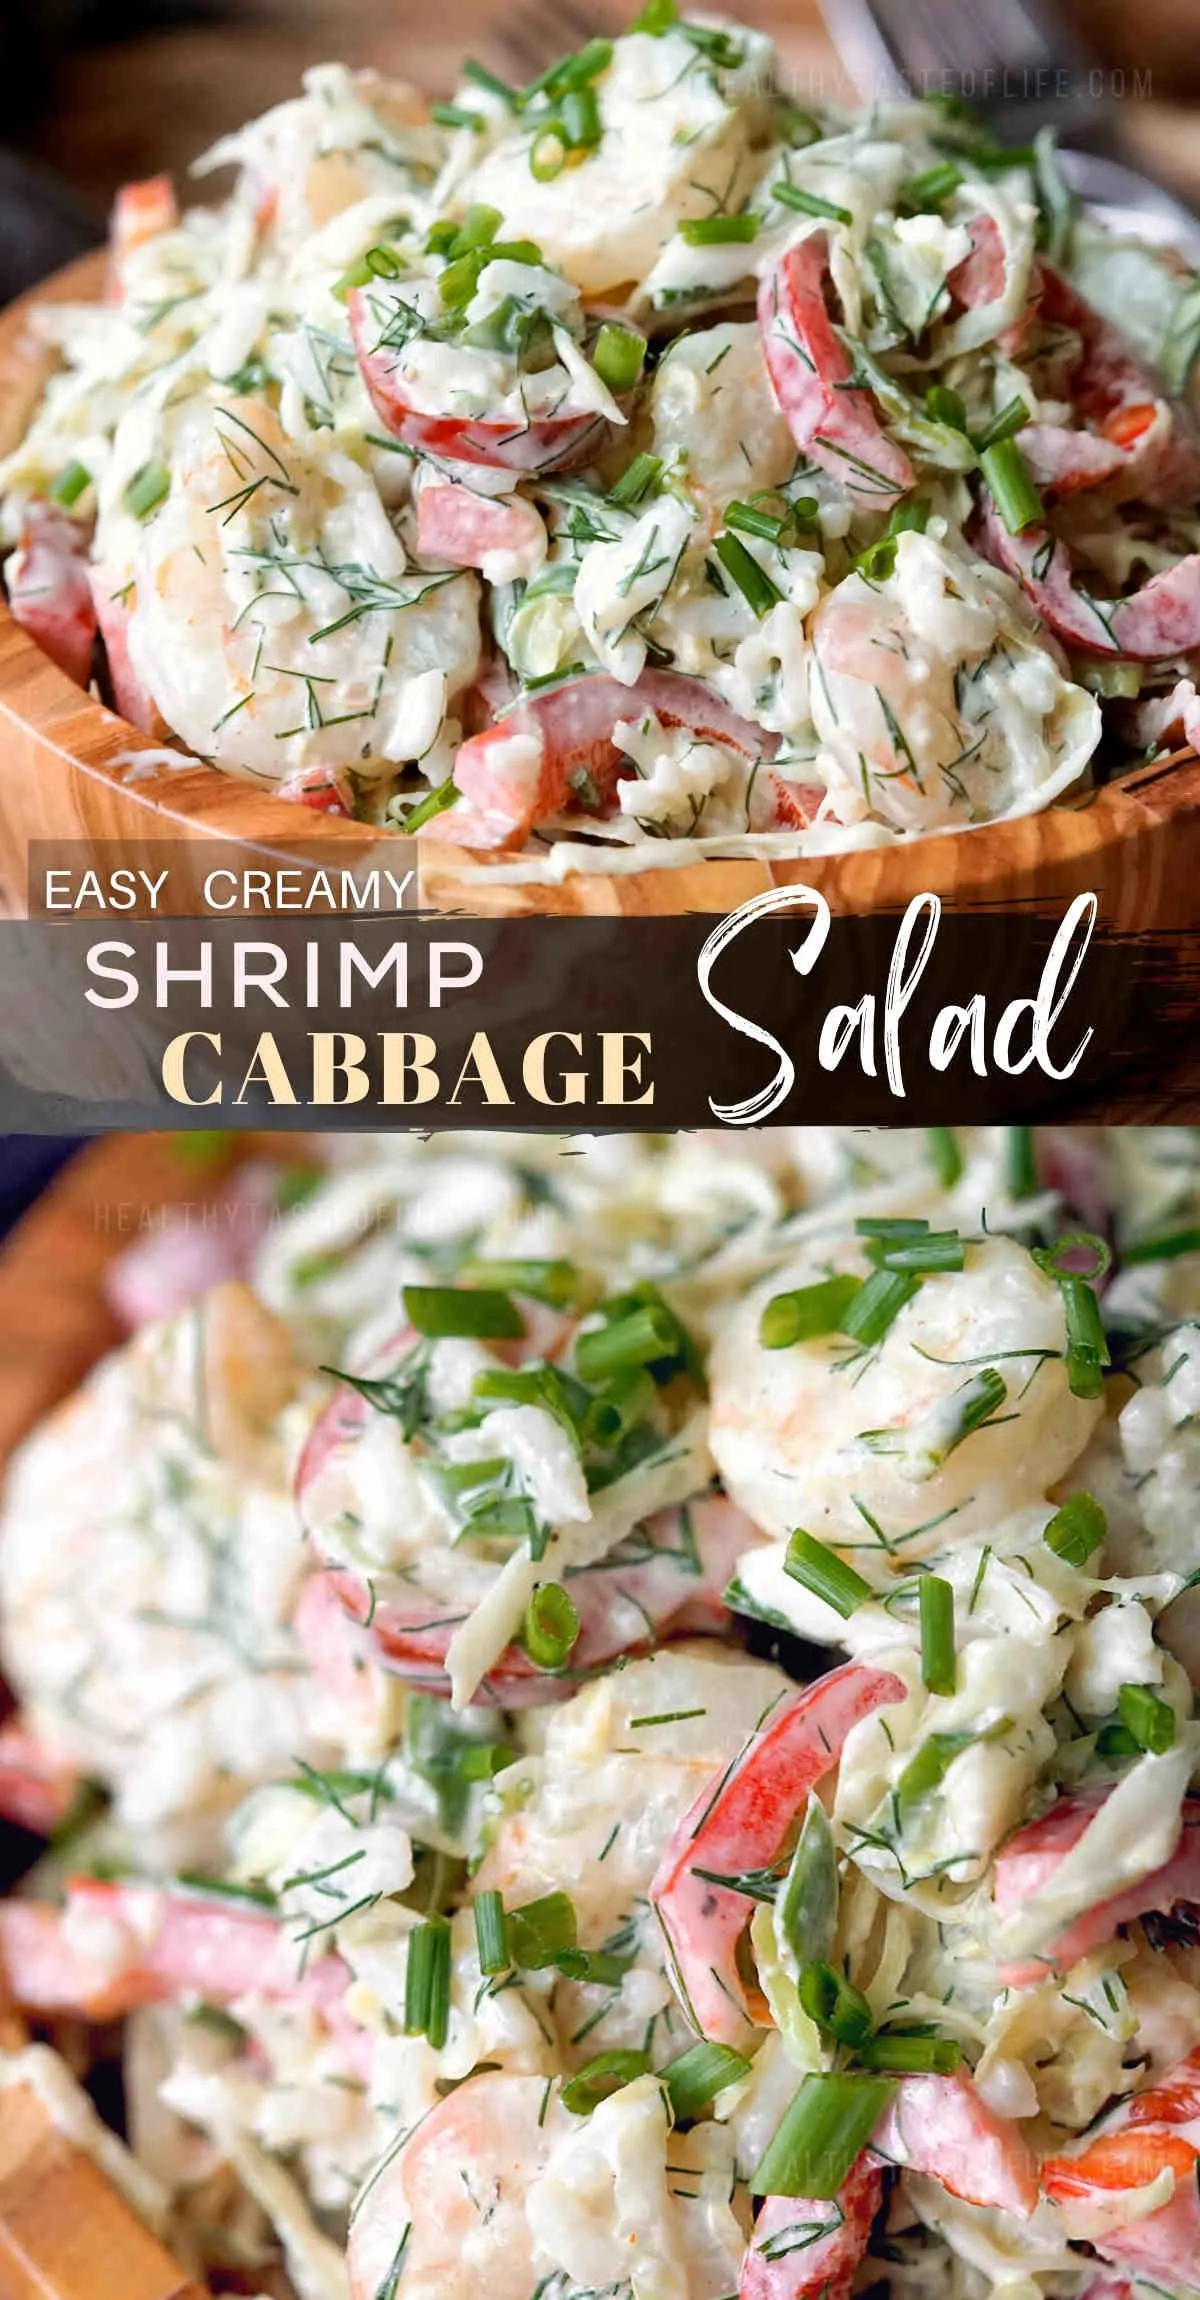 This easy shrimp cabbage salad features fresh shredded cabbage, cooked shrimp and rice, crunchy sweet bell pepper and green onion, then coated in a creamy dill dressing. Serve this simple cabbage and shrimp salad for lunch or dinner -  it also makes a filling main dish. Eat this cold shrimp cabbage salad as-is, as a side dish or spooned into a lettuce leaf for festive tables and holidays – great for a crowd and parties. #cabbagesalad #shrimpsalad #shrimpcabbagesalad #easysalad #cold #simple